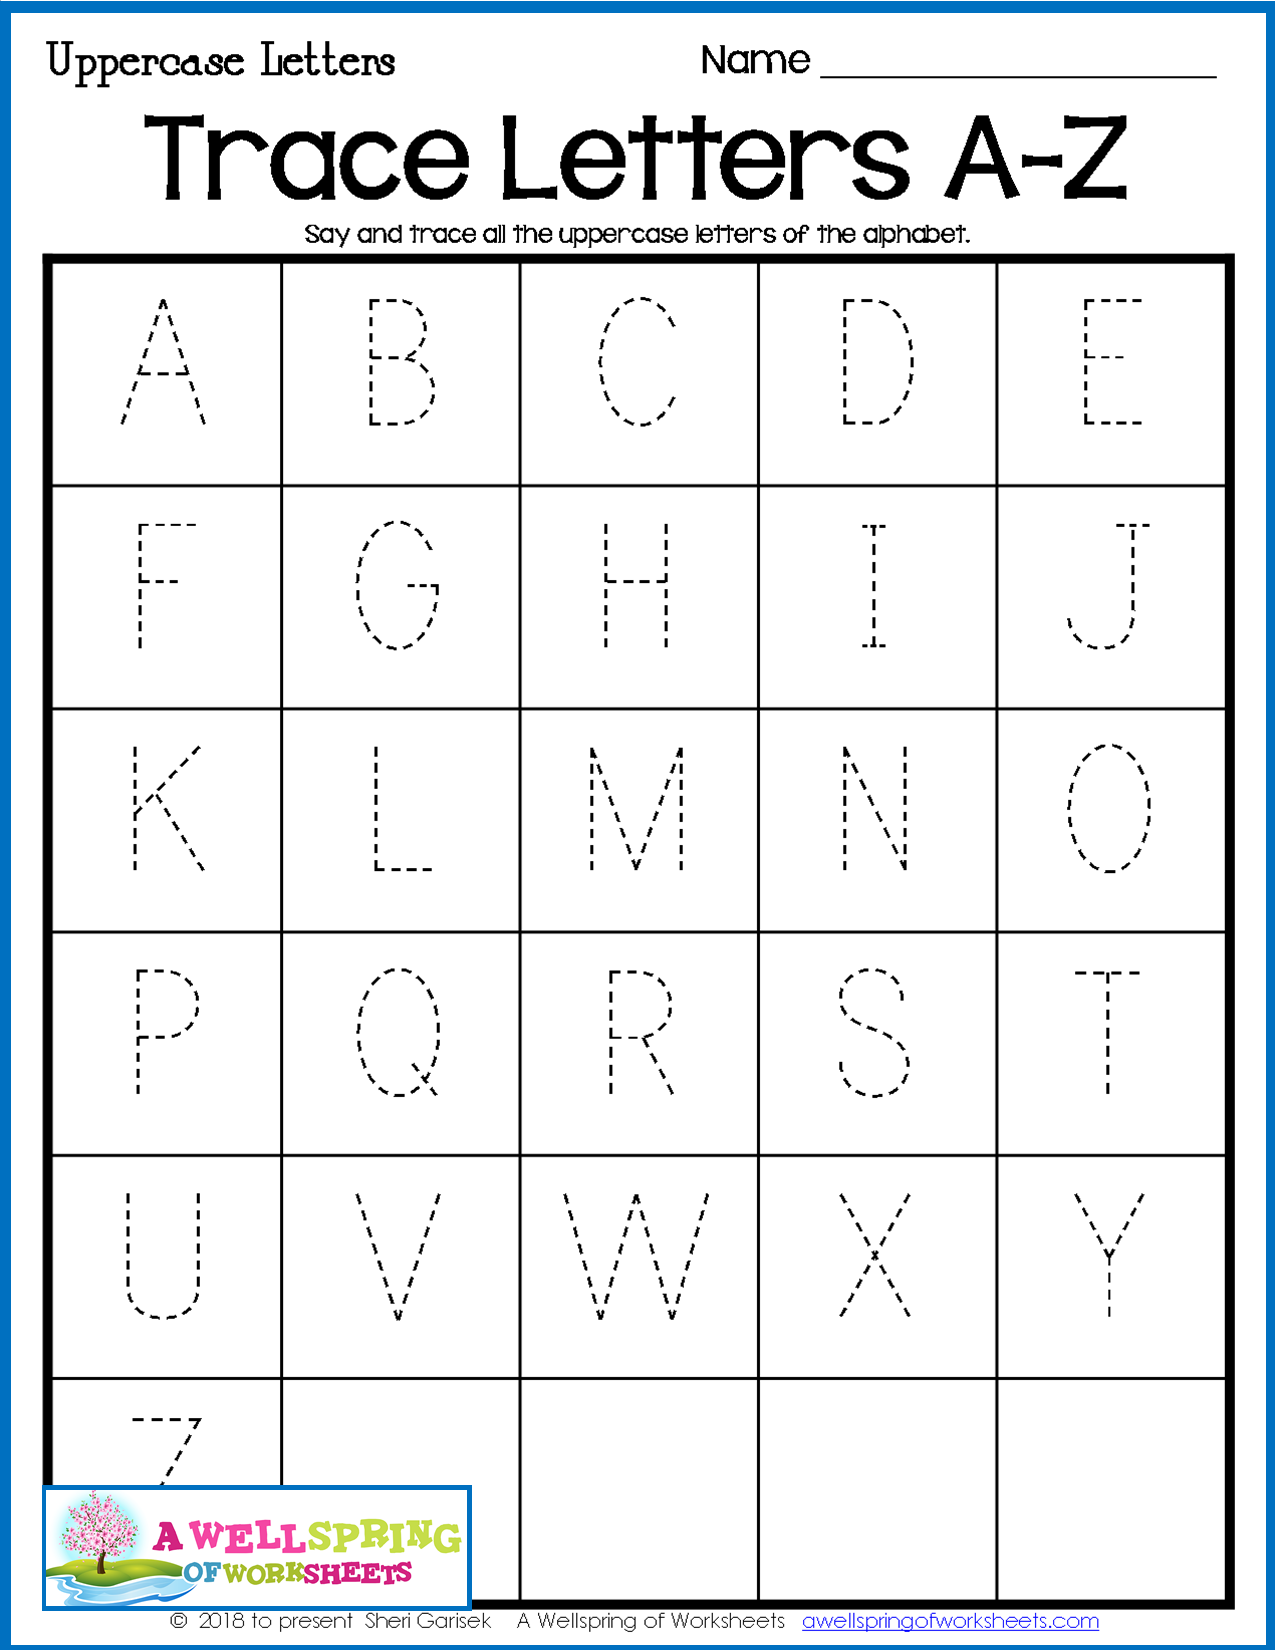 Alphabet Tracing Pages - Uppercase And Lowercase Letters inside Alphabet Tracing Uppercase